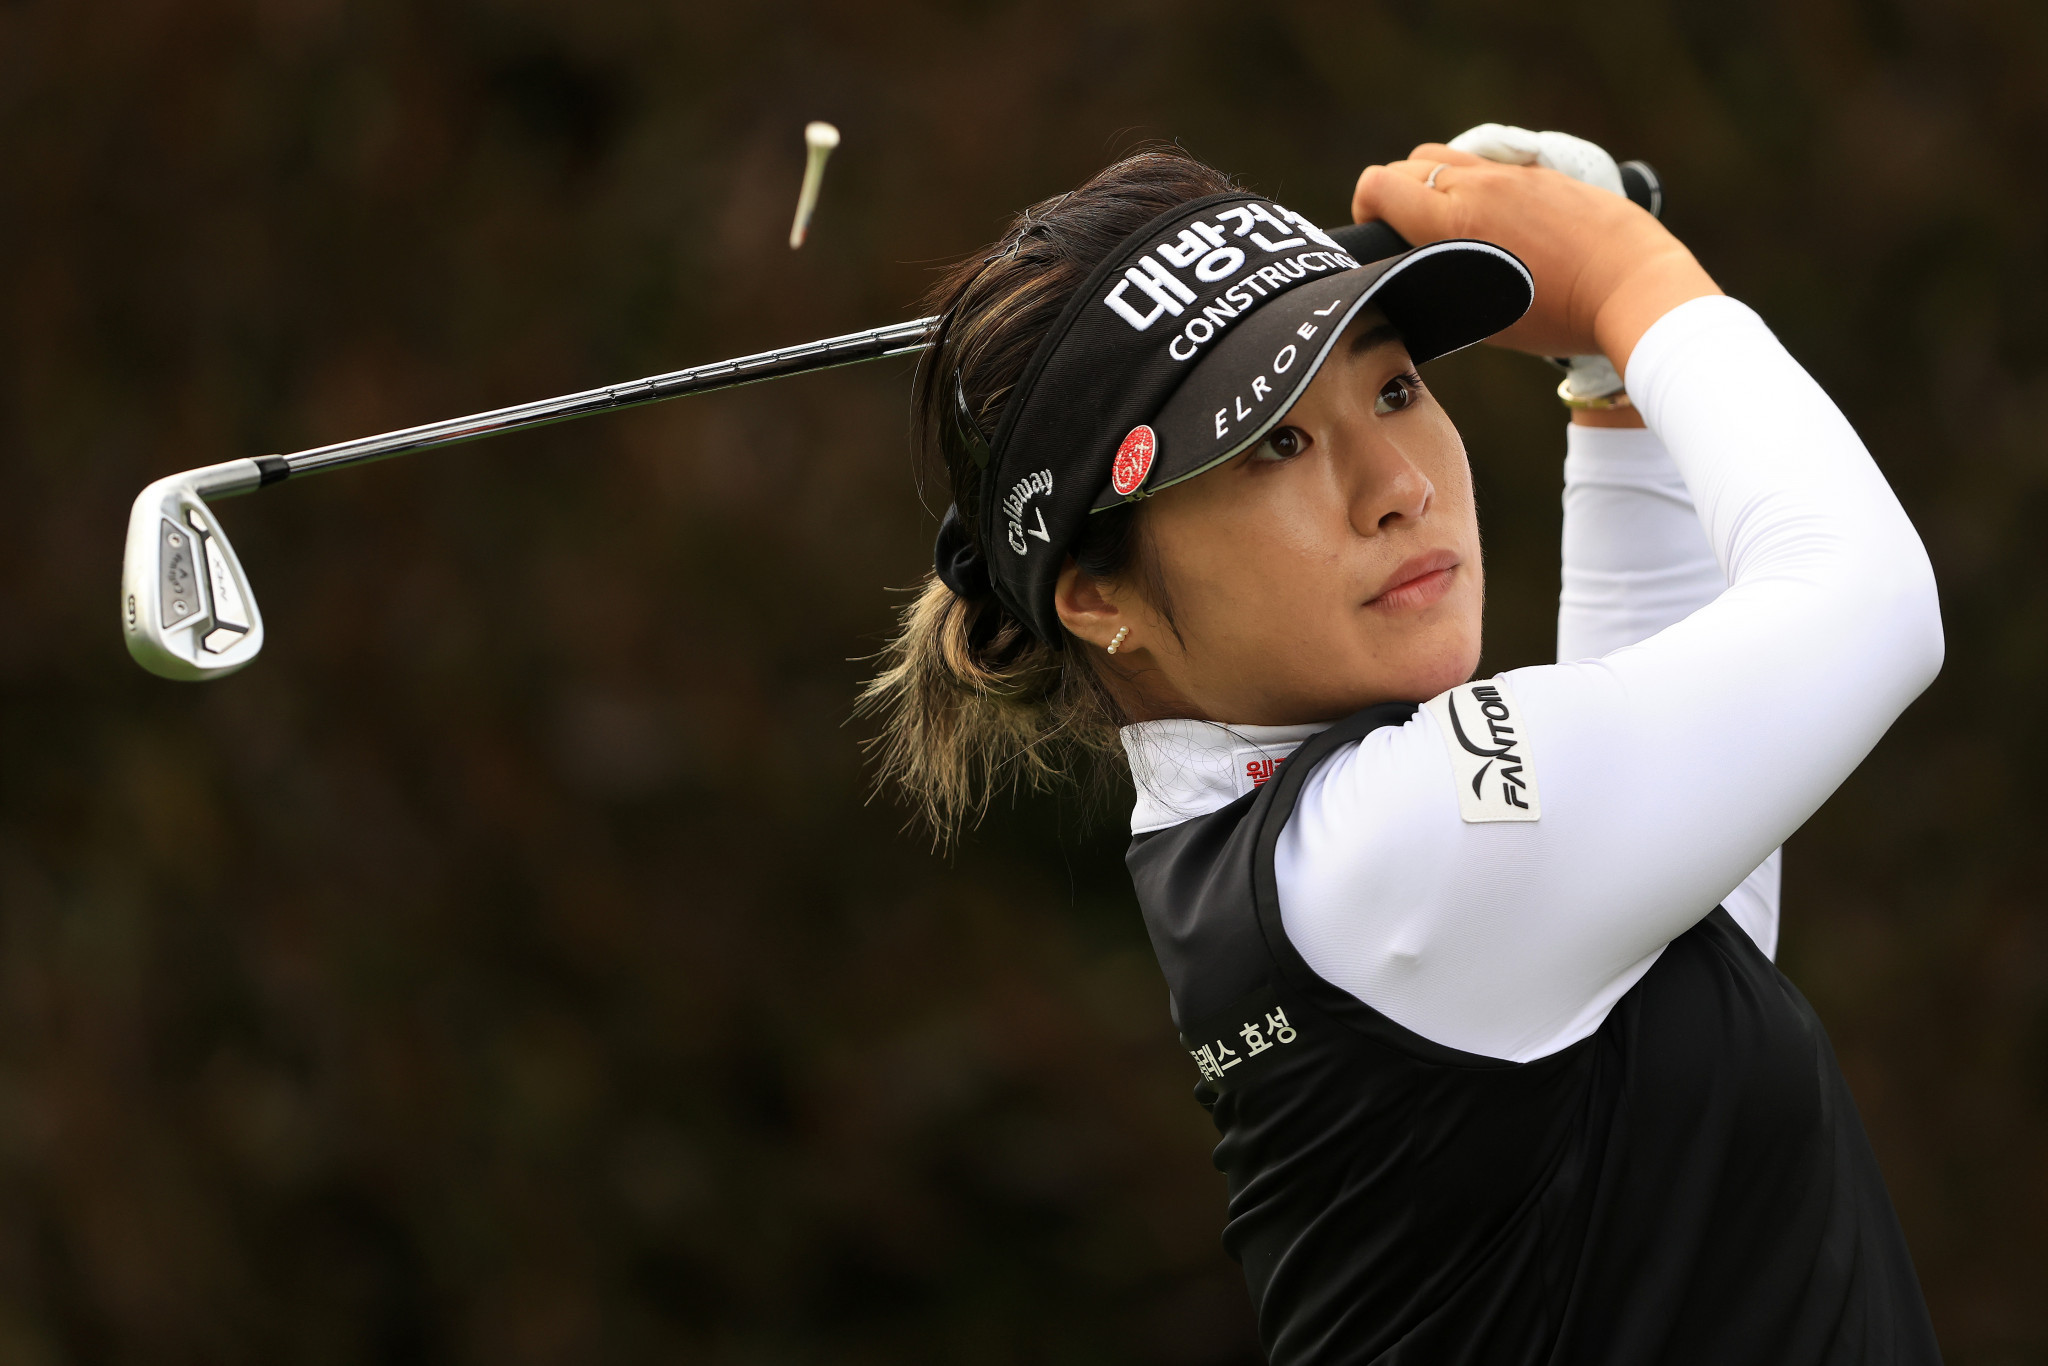 Lee Jeong-eun finished strongly to move within a shot of the lead at the US Women's Open ©Getty Images